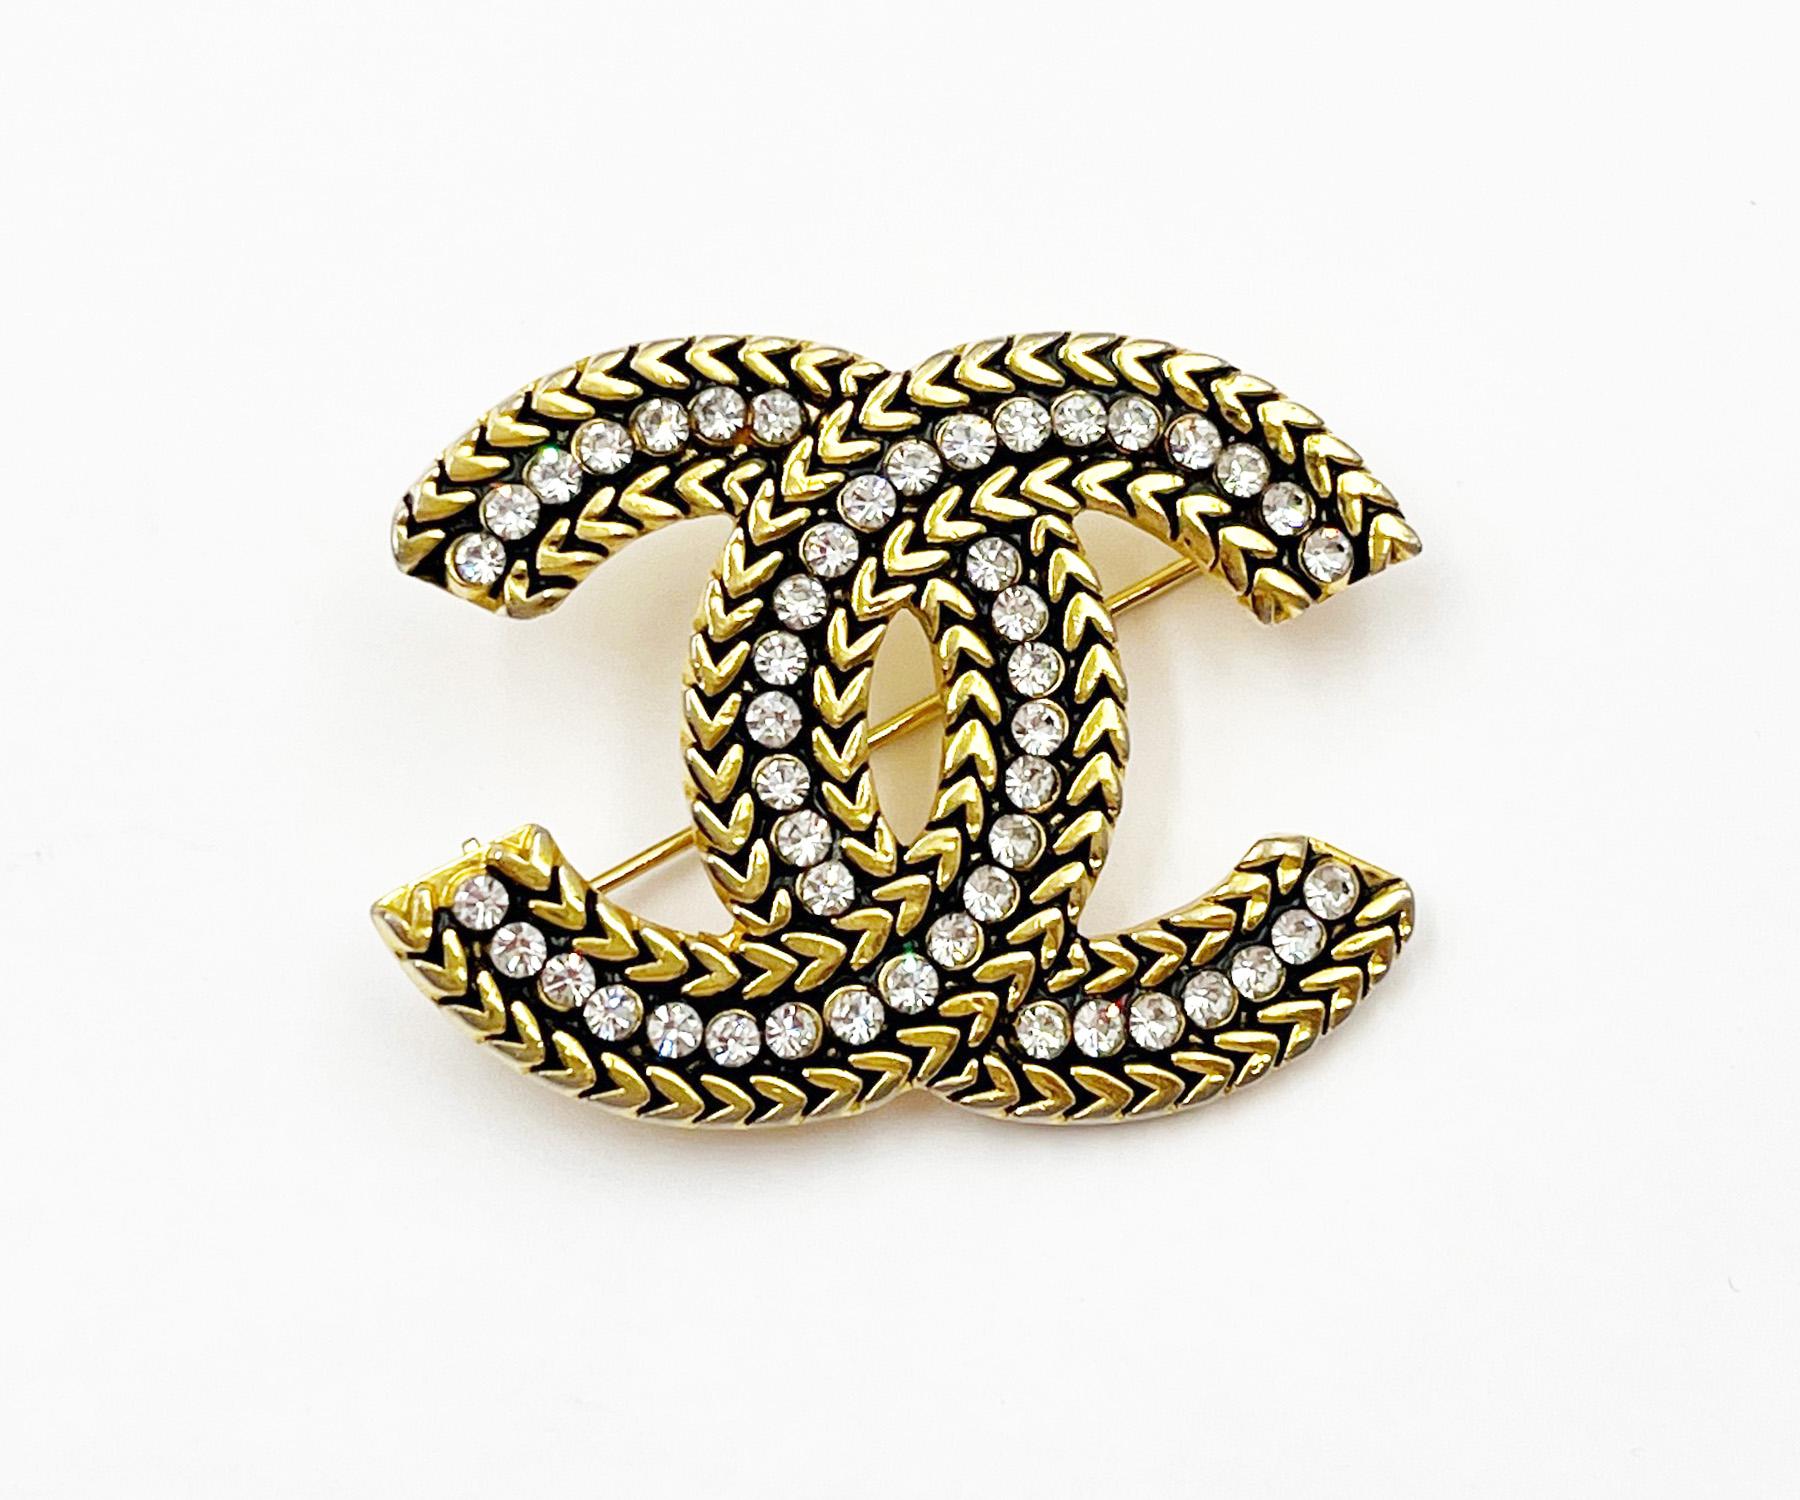 *Marked Chanel (70s)
*Made in France

-It is approximately 1.75